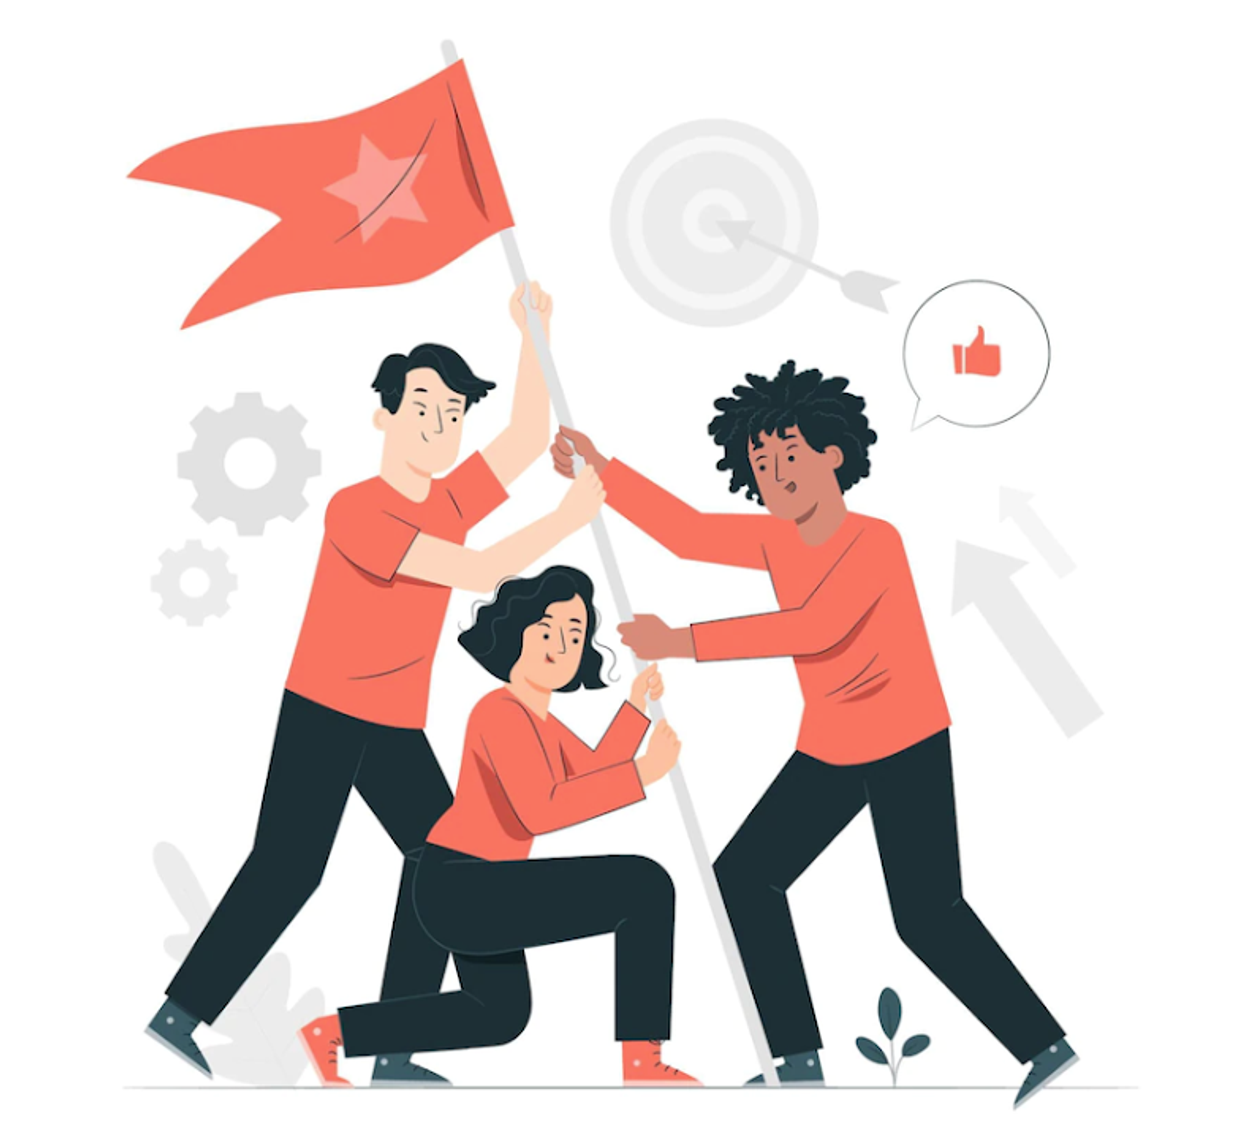 A vector illustration about team work